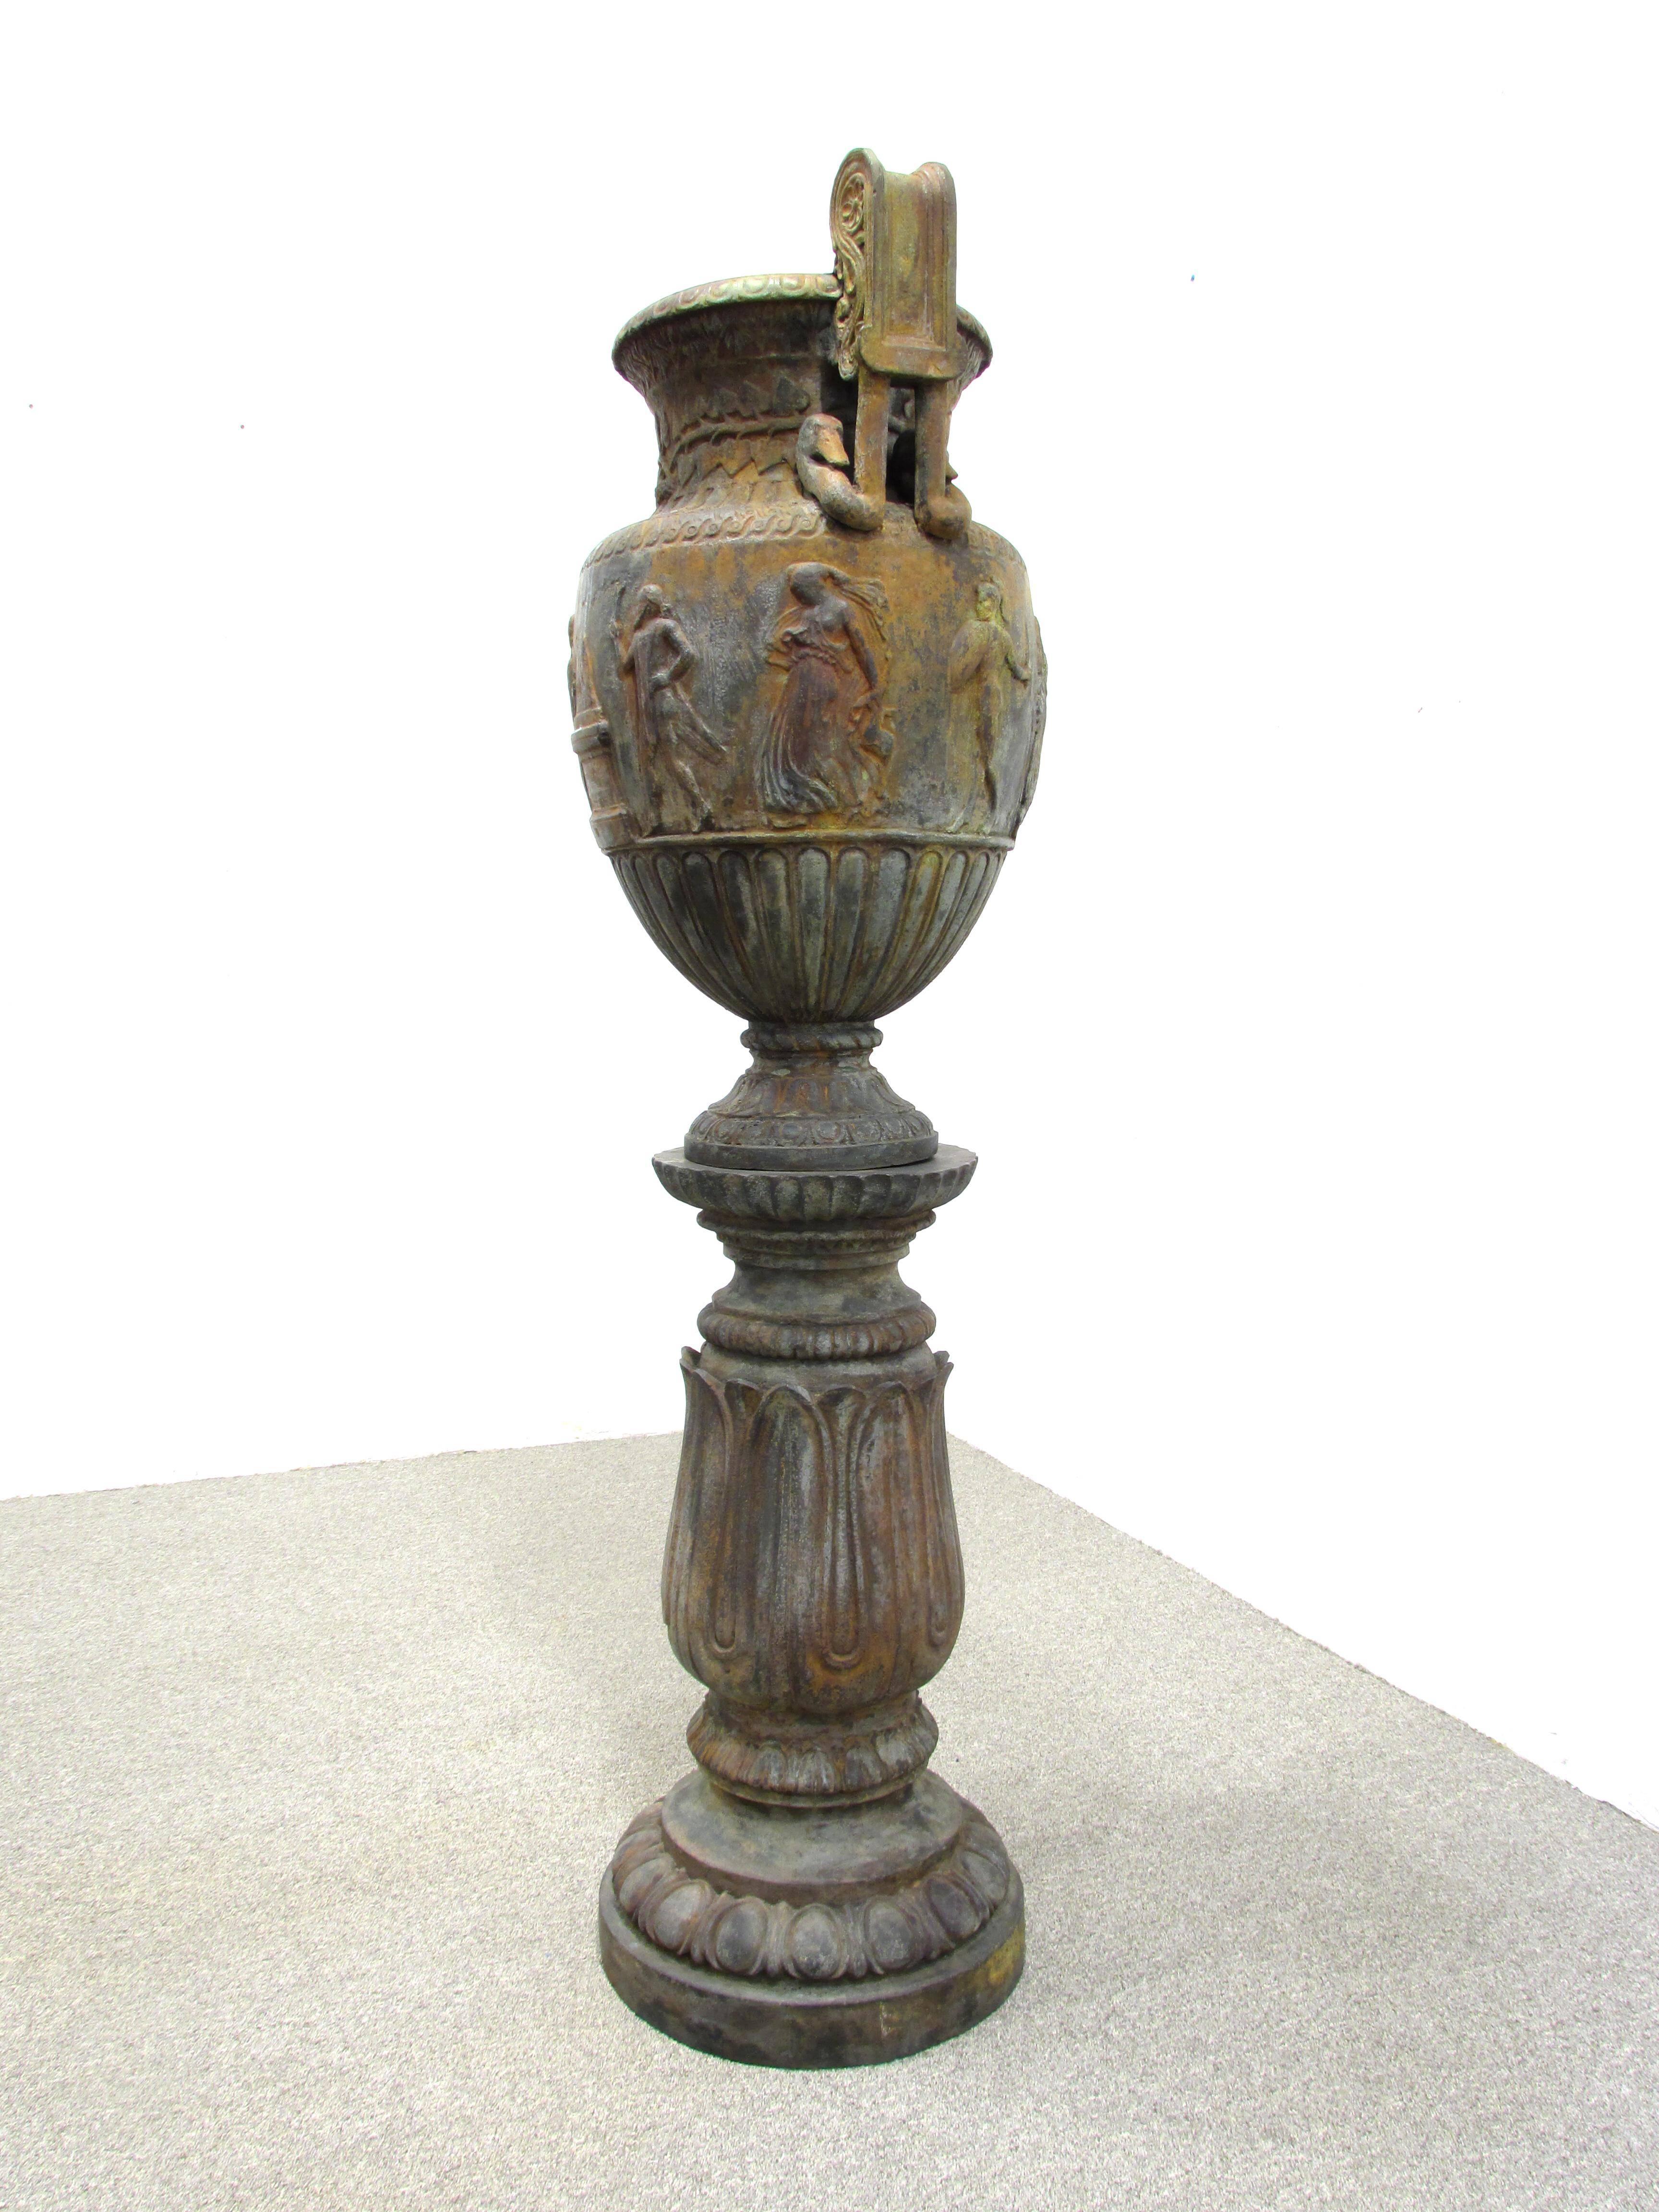 Large bronze urn in the neoclassical style the main body with musicians and hunting figures over lotus leaf base and swan neck and scroll handles.